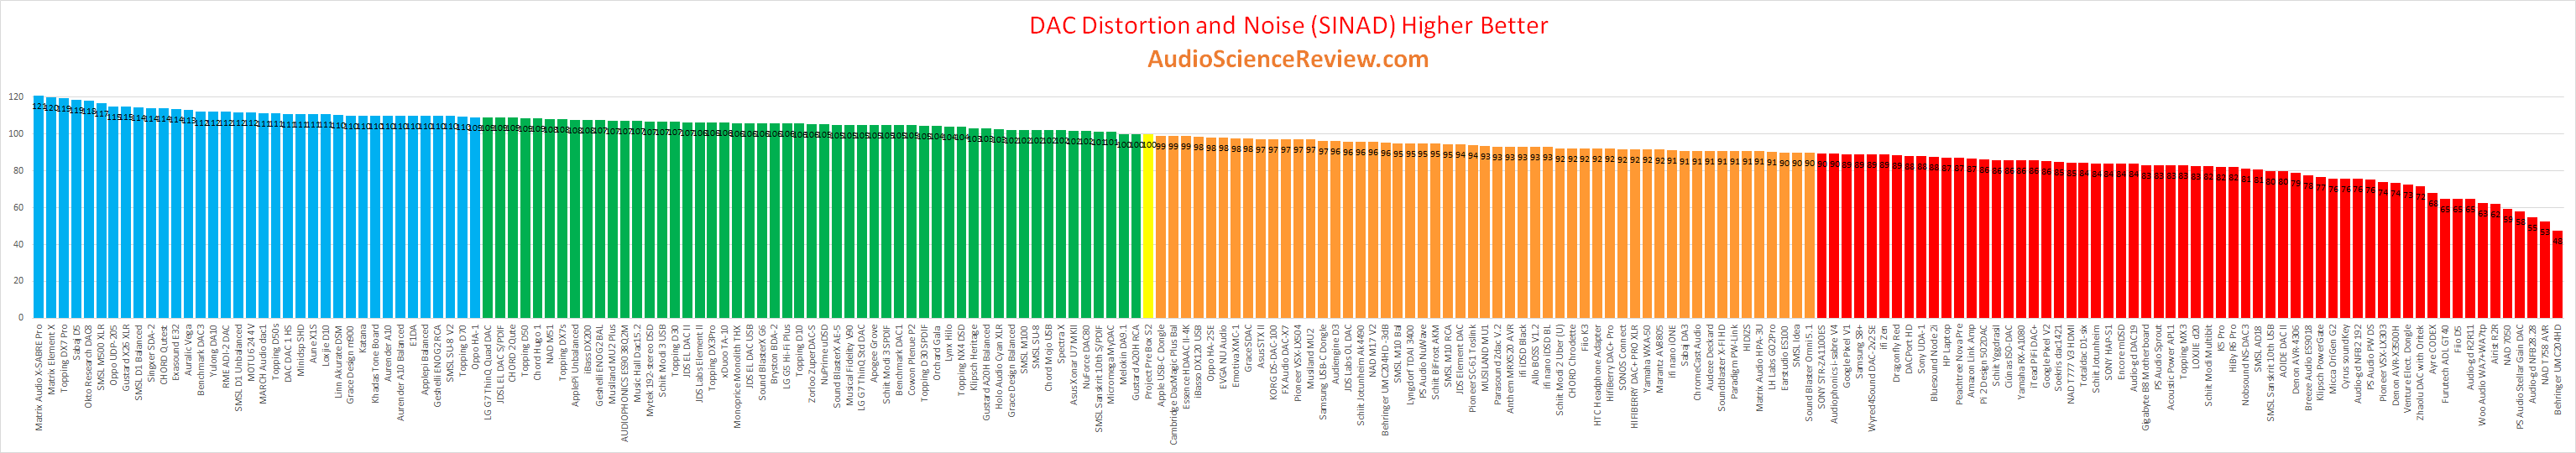 Best USB DAC Reviewed.png